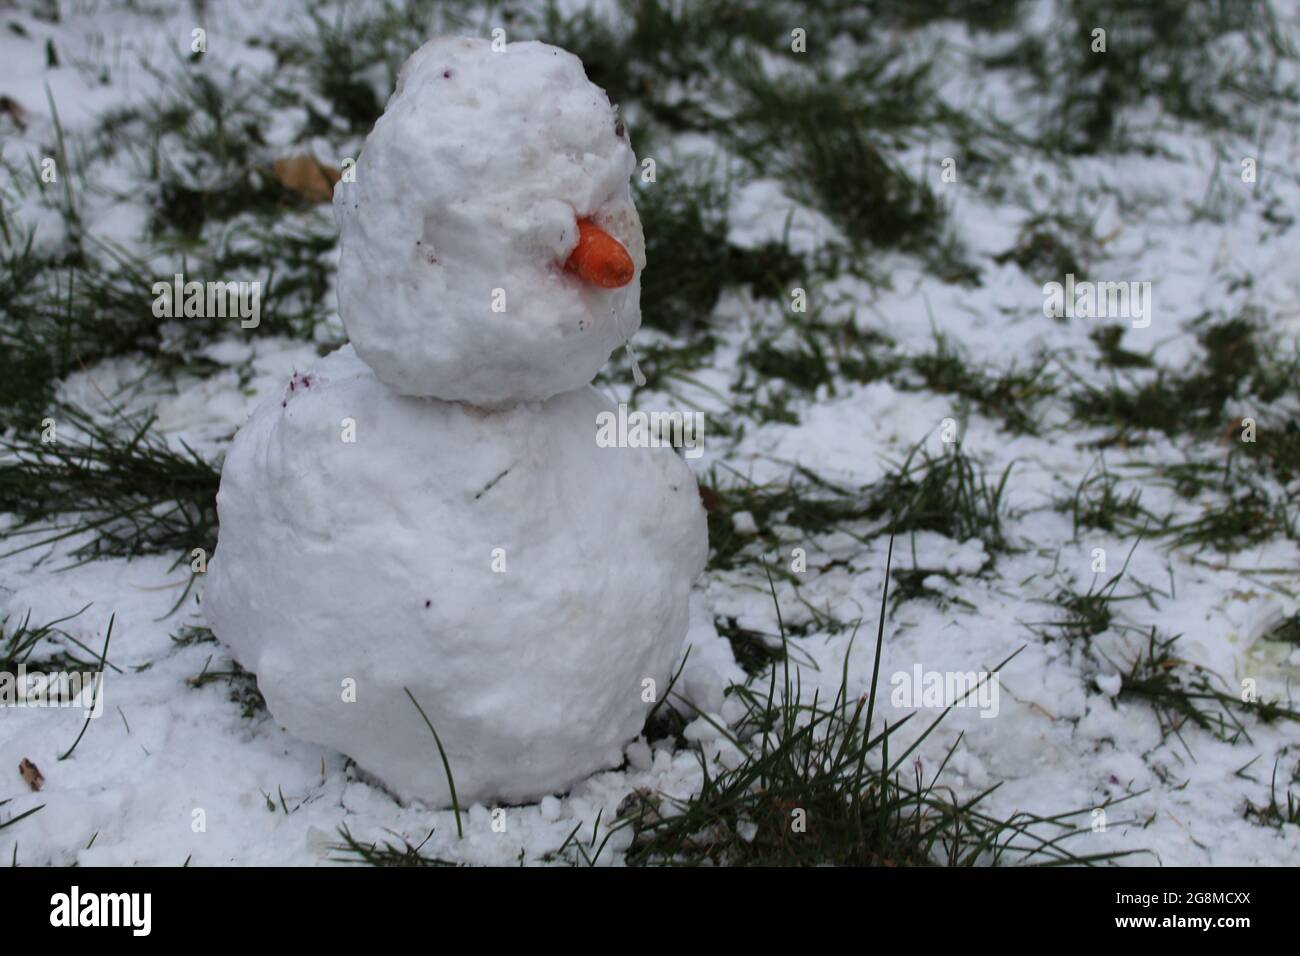 Snowman with carrot for nose Stock Photo